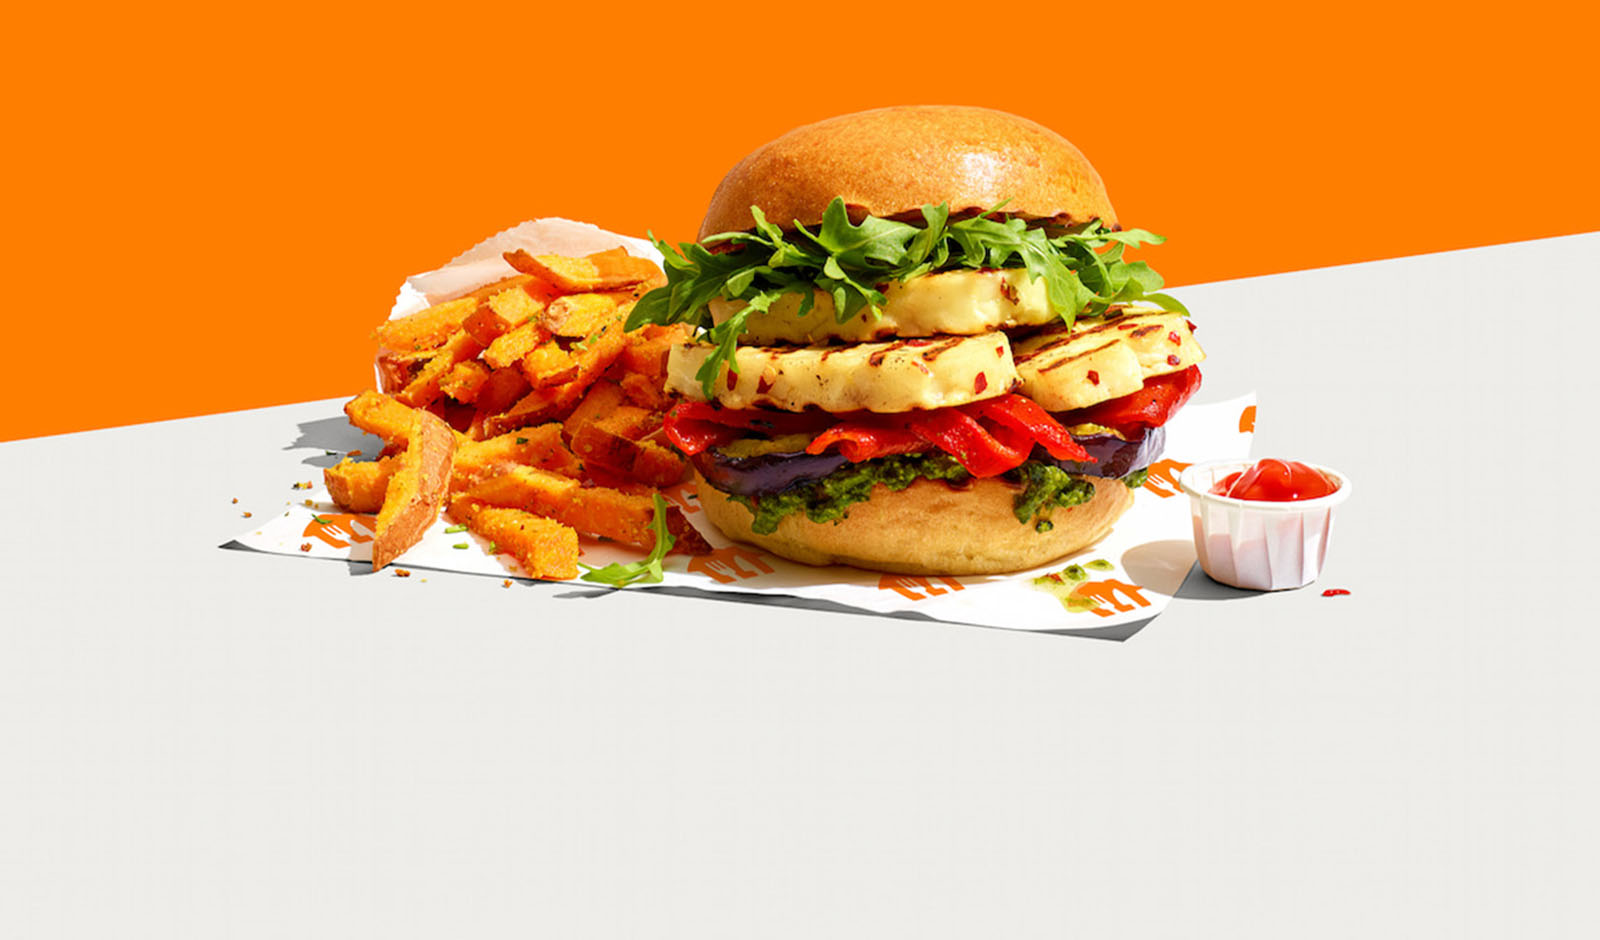 Get £5 cashback on a £10+ spend at Just Eat